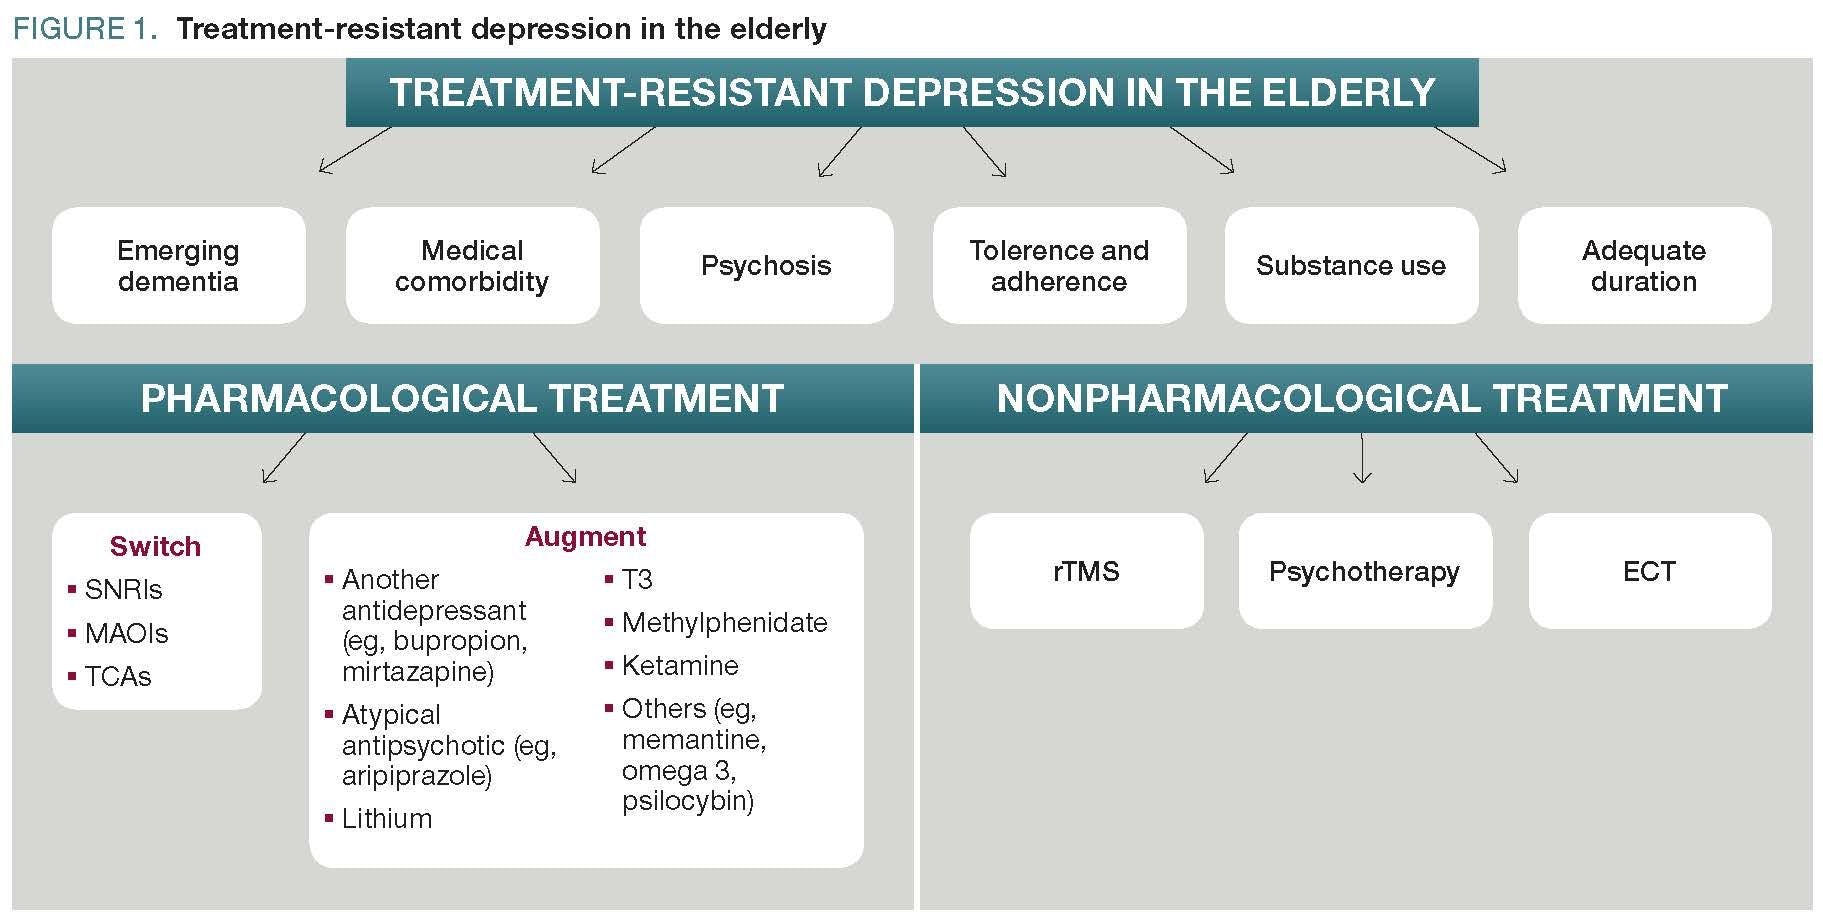 Treatment-resistant depression in the elderly